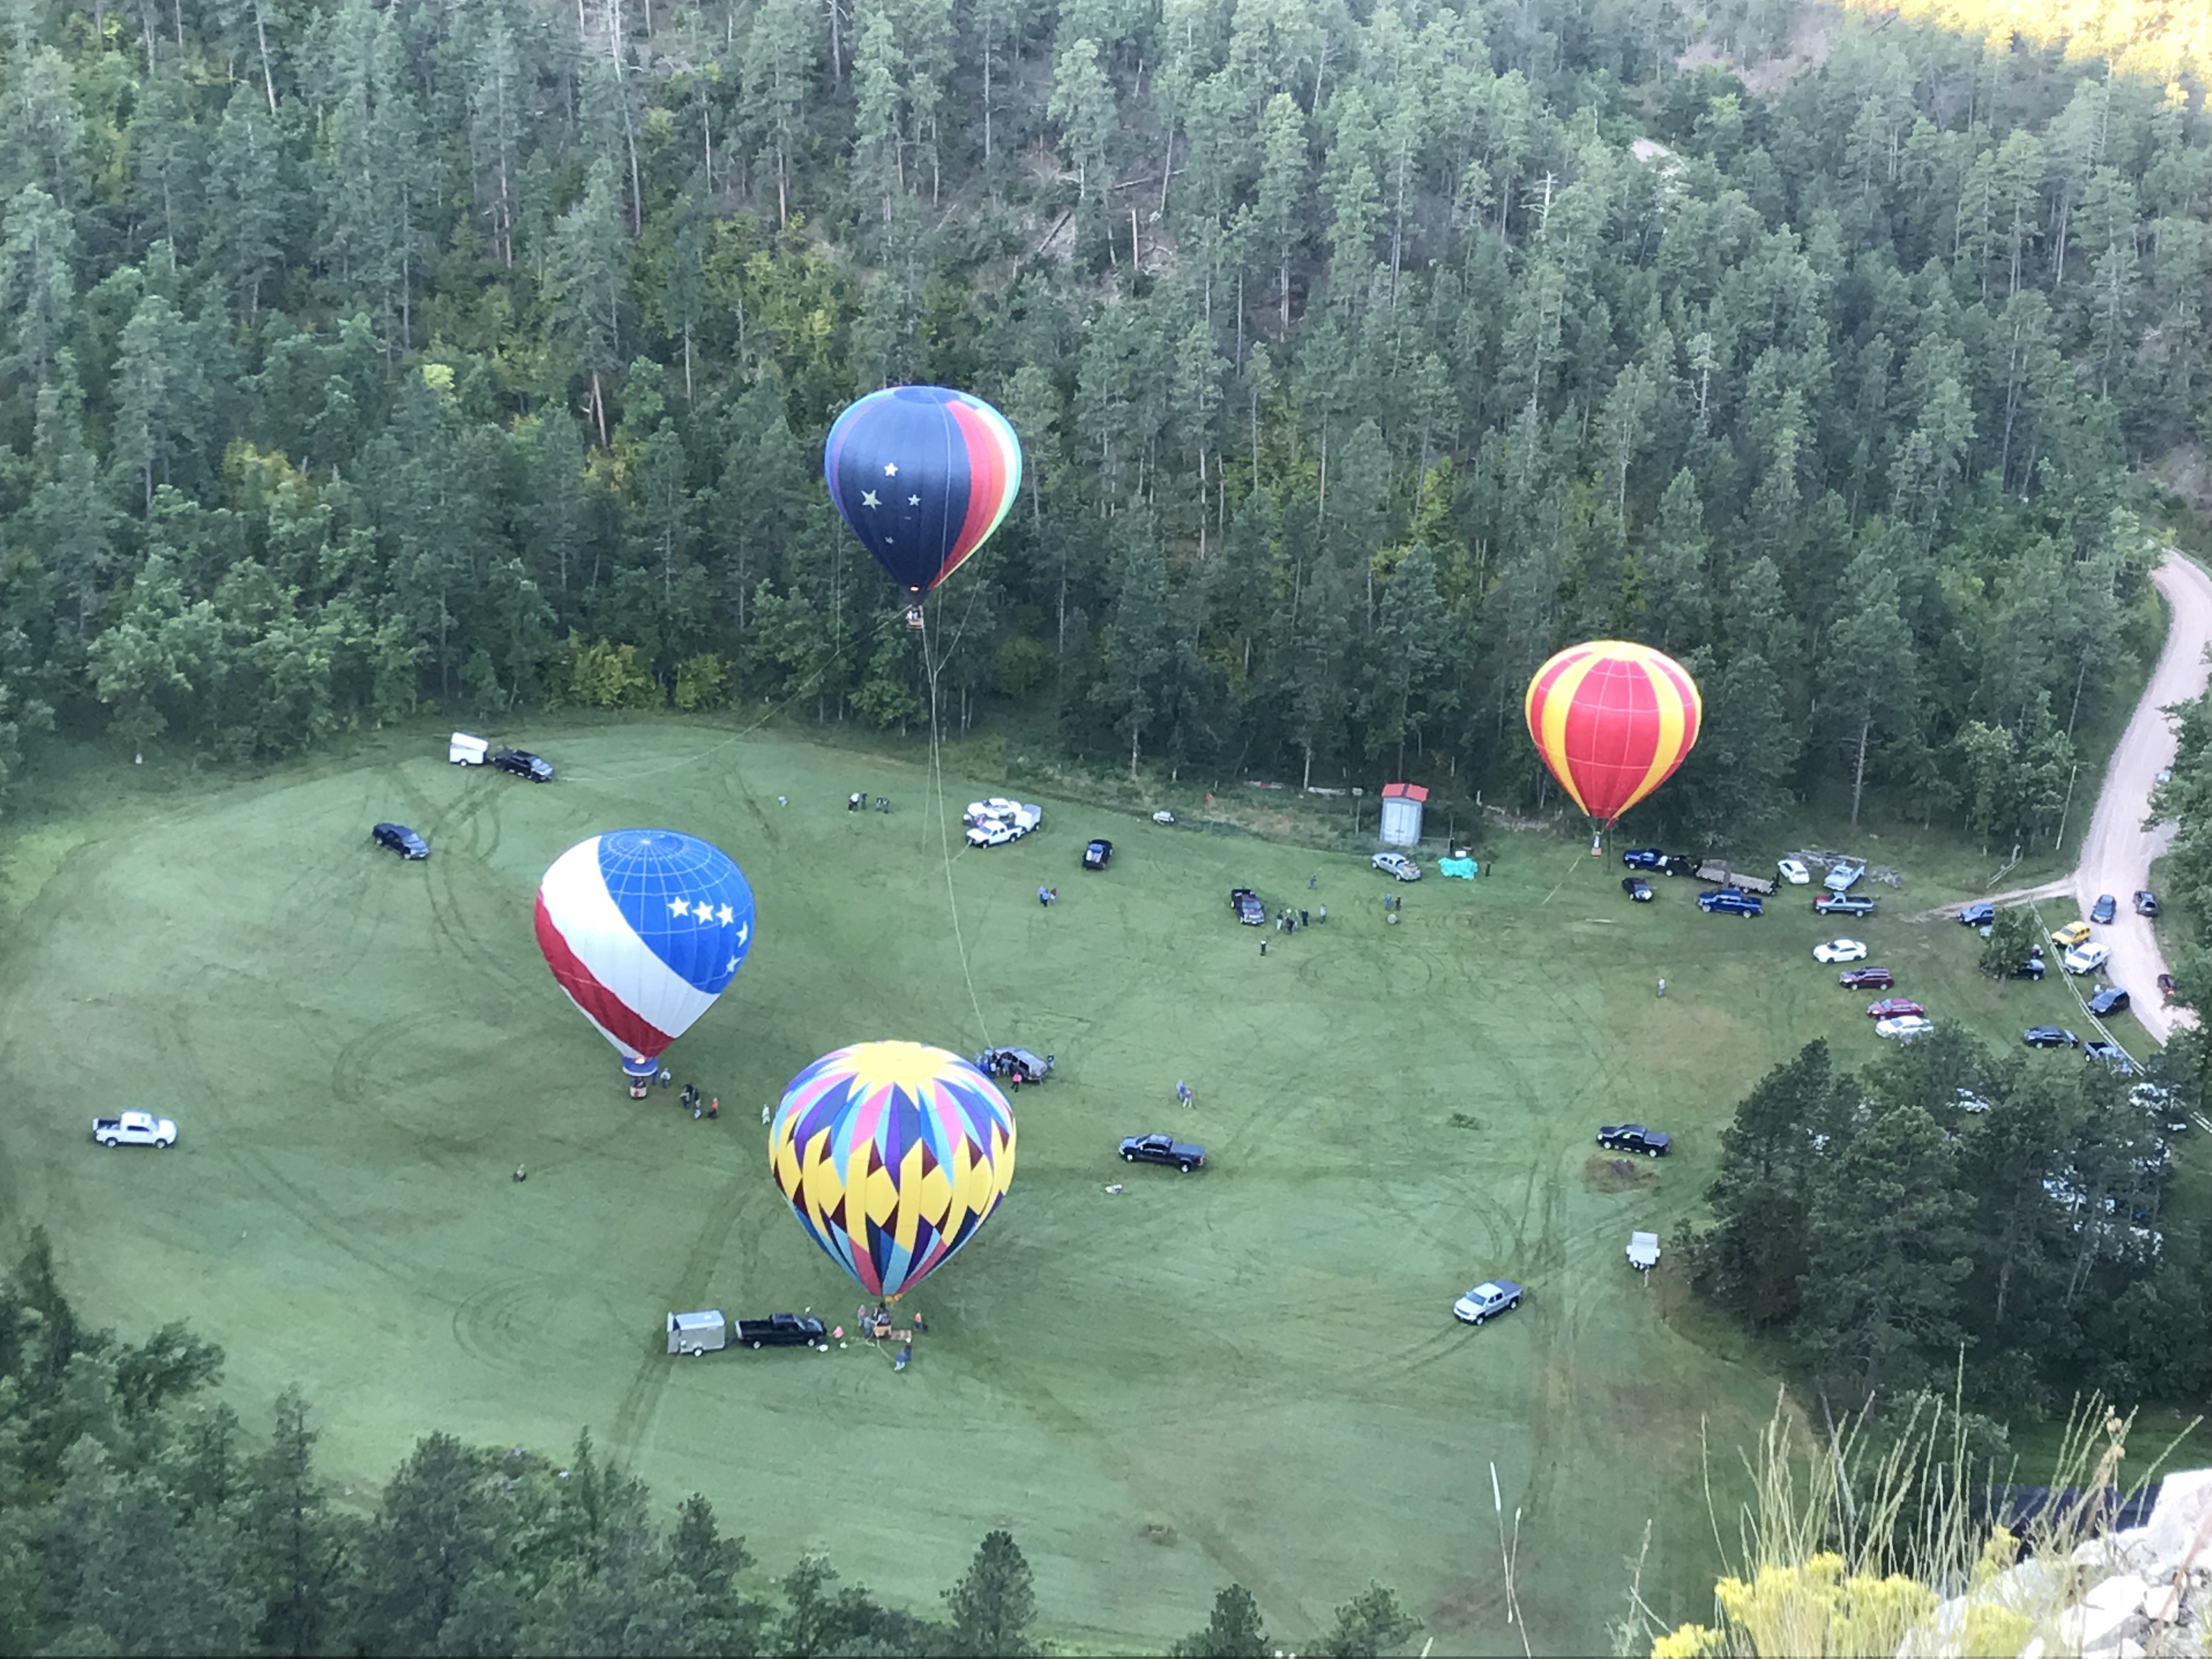 Top view of four colorful, hot air balloons floating near a grassy, valley floor surrounded by pine trees. A few tethers string down from the balloons. Cars and trucks also dot the valley floor.